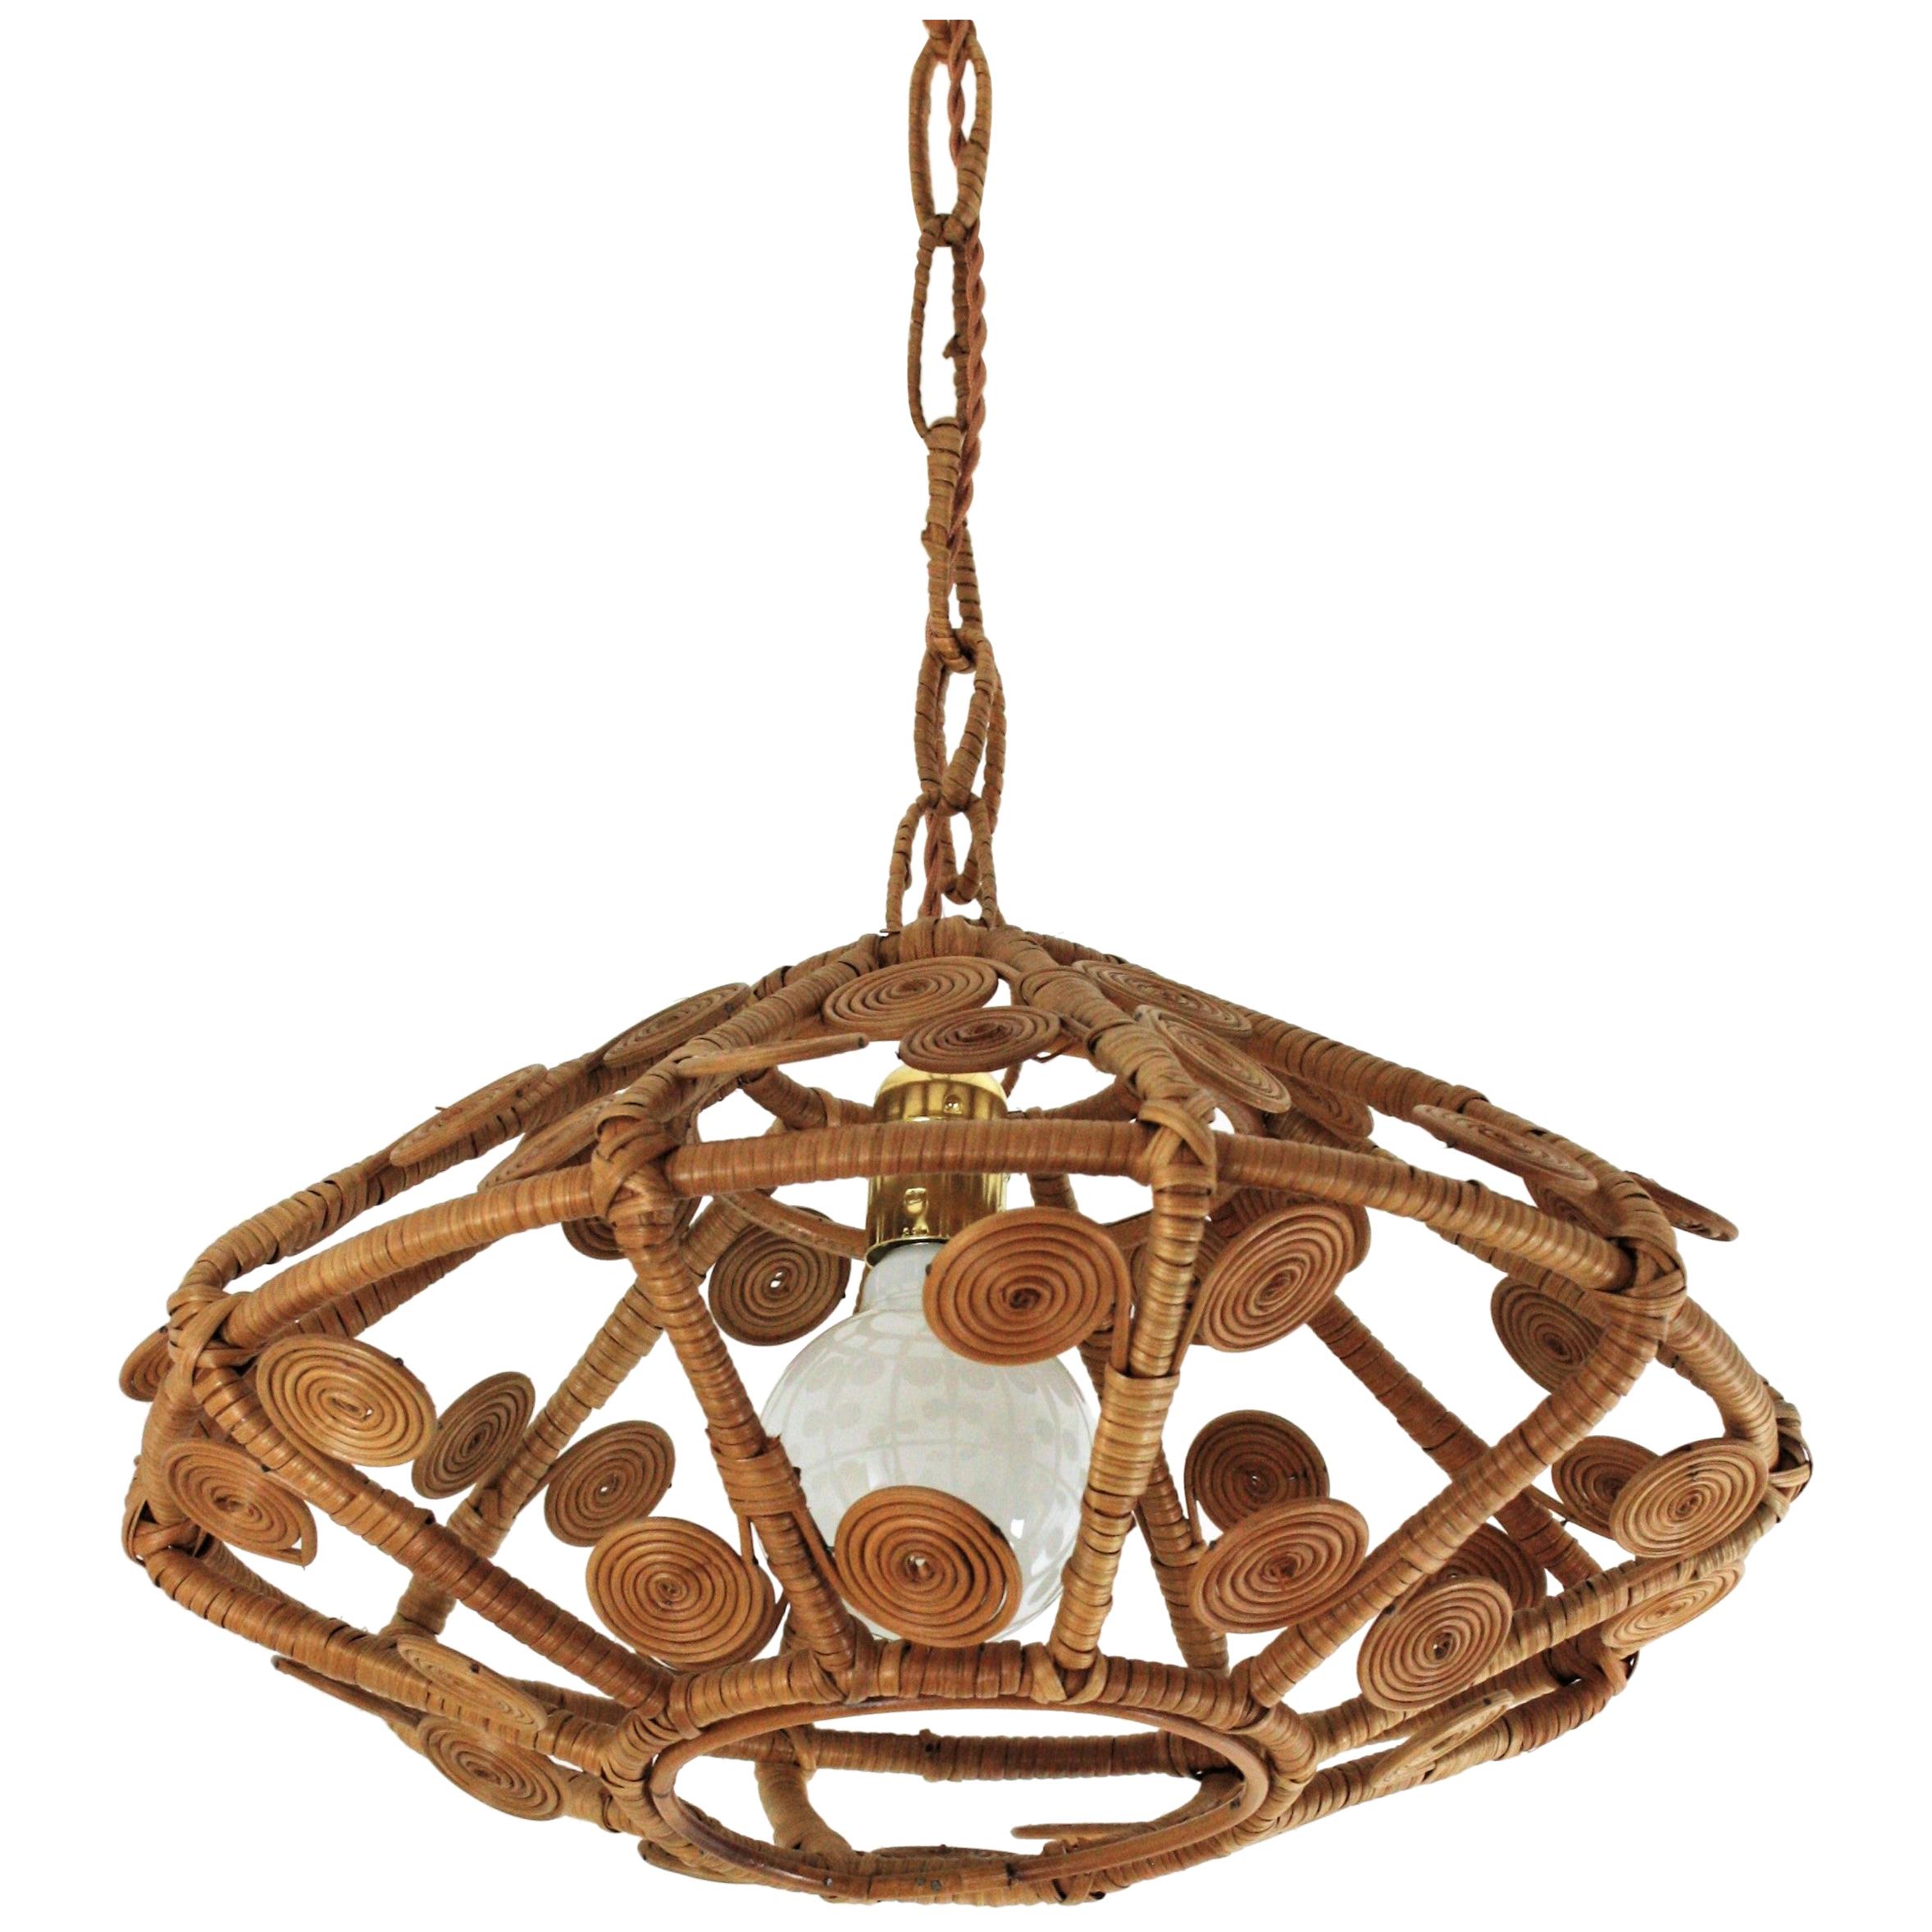 Eye-catching handcrafted wicker / rattan suspension lamp or lantern with artistic filigree work. Spain, 1960s
This rattan pendant features a lampshade structure all made in cane with beautiful scroll and filigree motifs and reminiscences in design